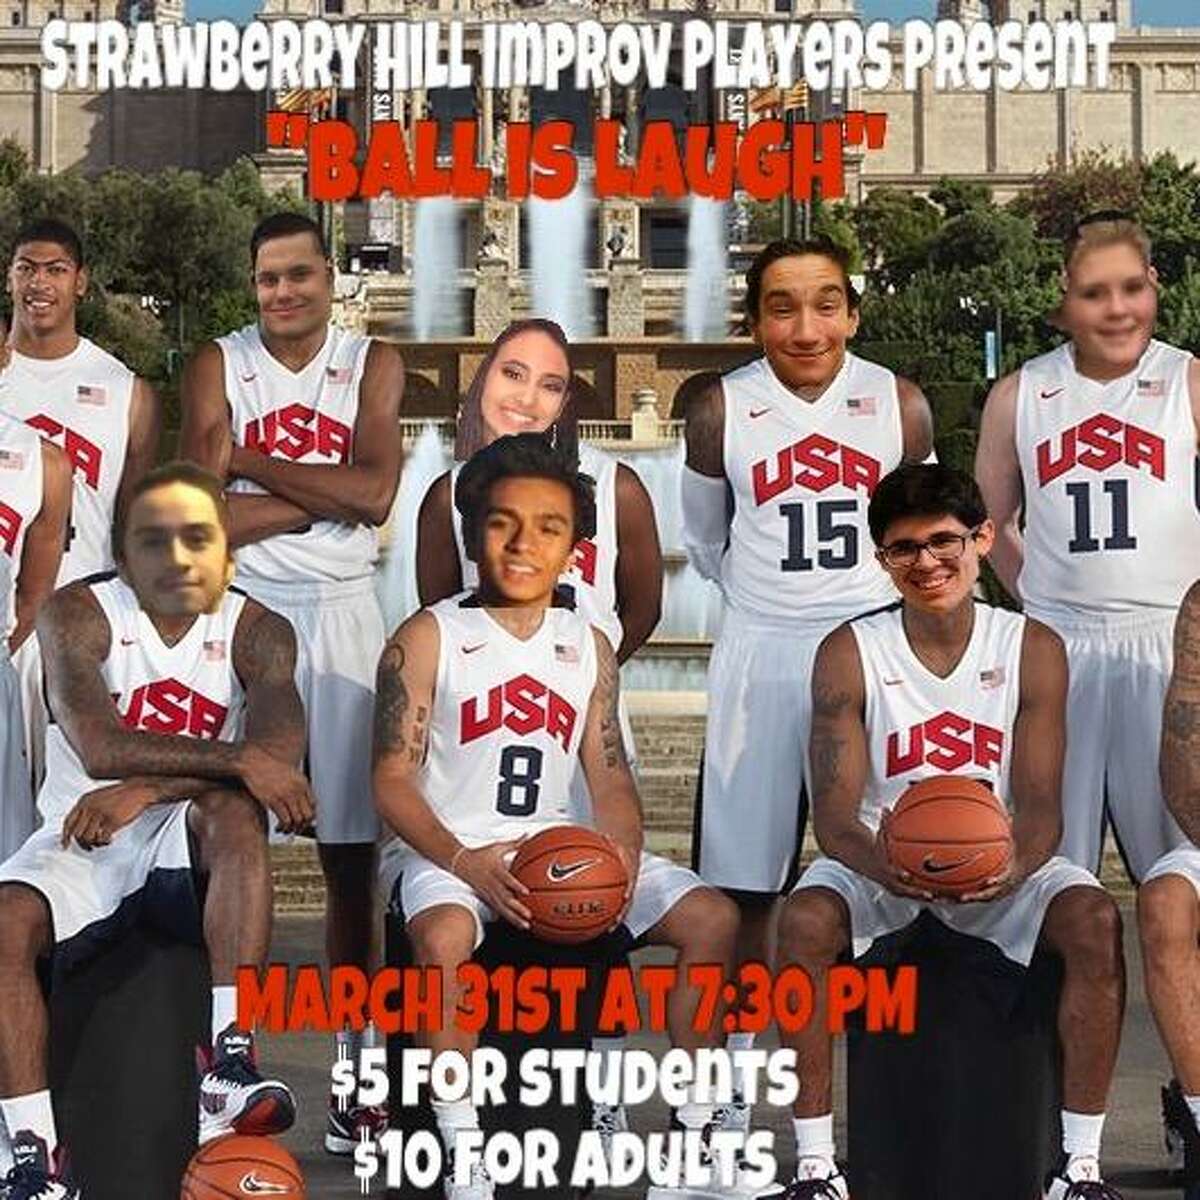 A poster promotes Strawberry Hill Players’ last improvisational comedy show of the school year, “Ball is Laugh,” which is inspired by the March Madness basketball tournament.